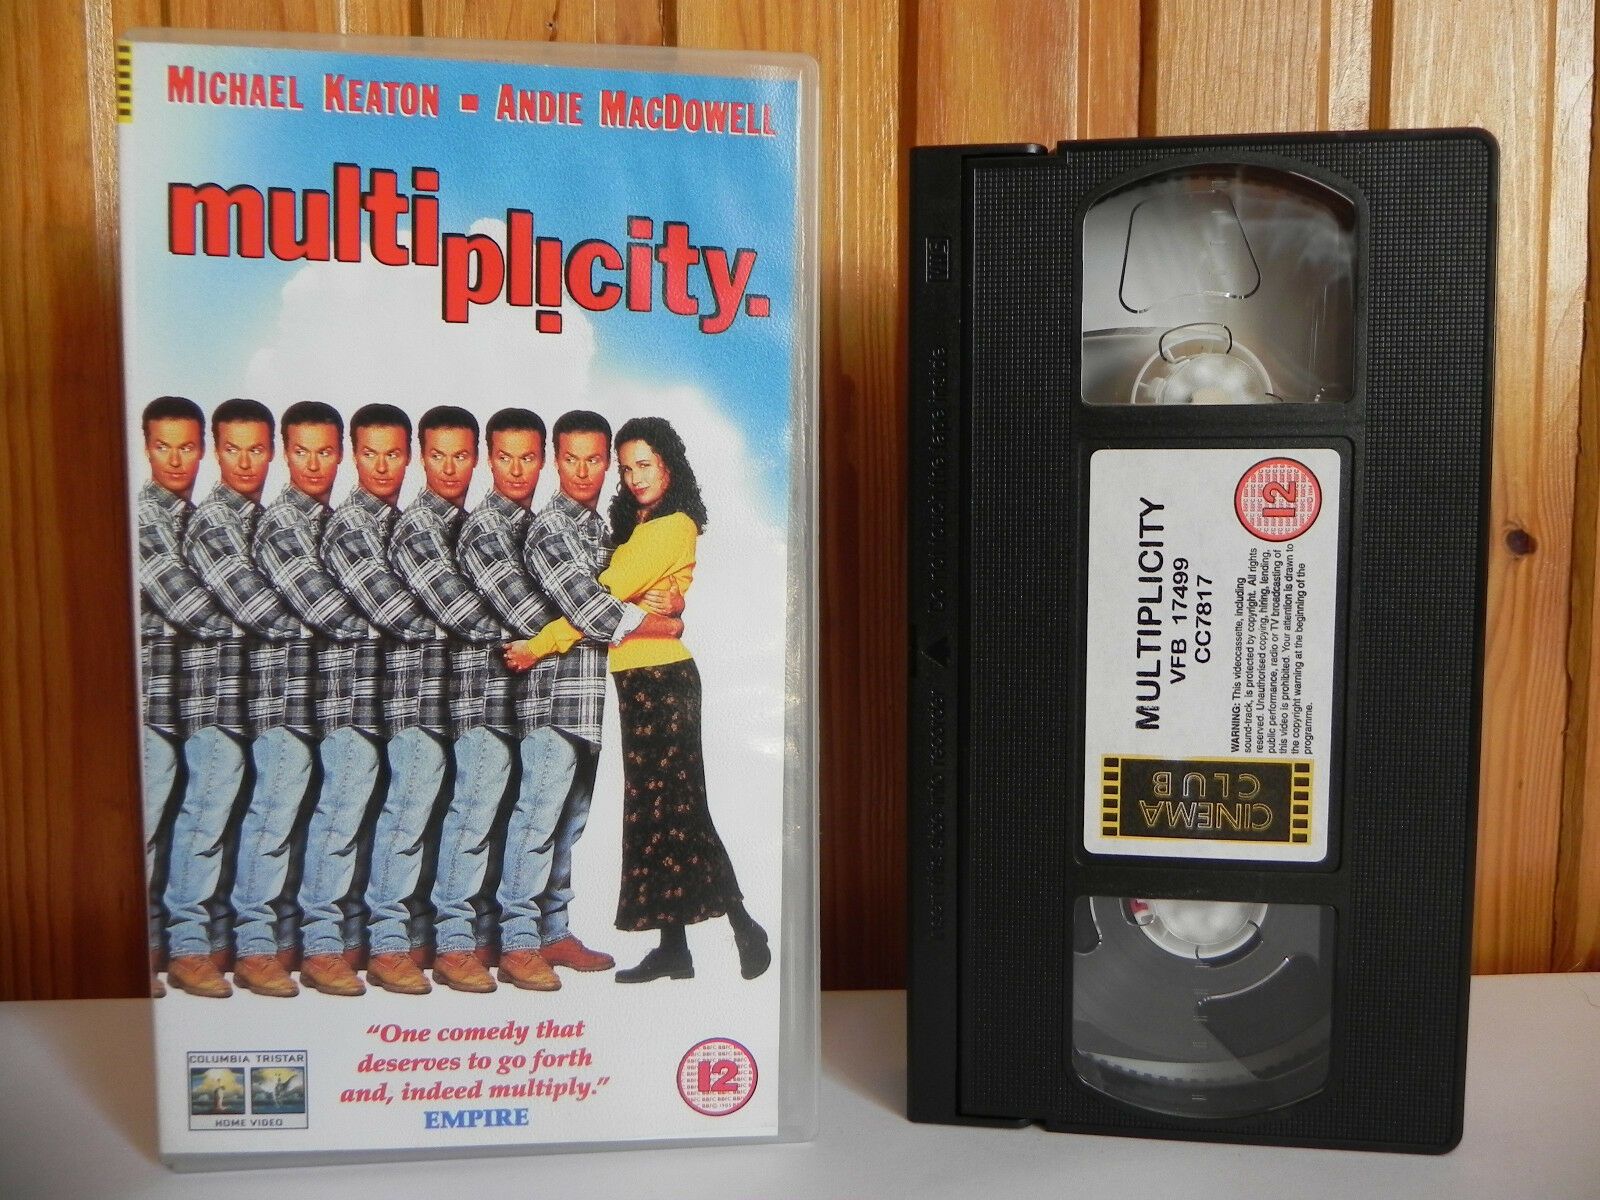 Multiplicity - Columbia Tristar - Comedy - Michael Keaton - Andie Mcdowell VHS-